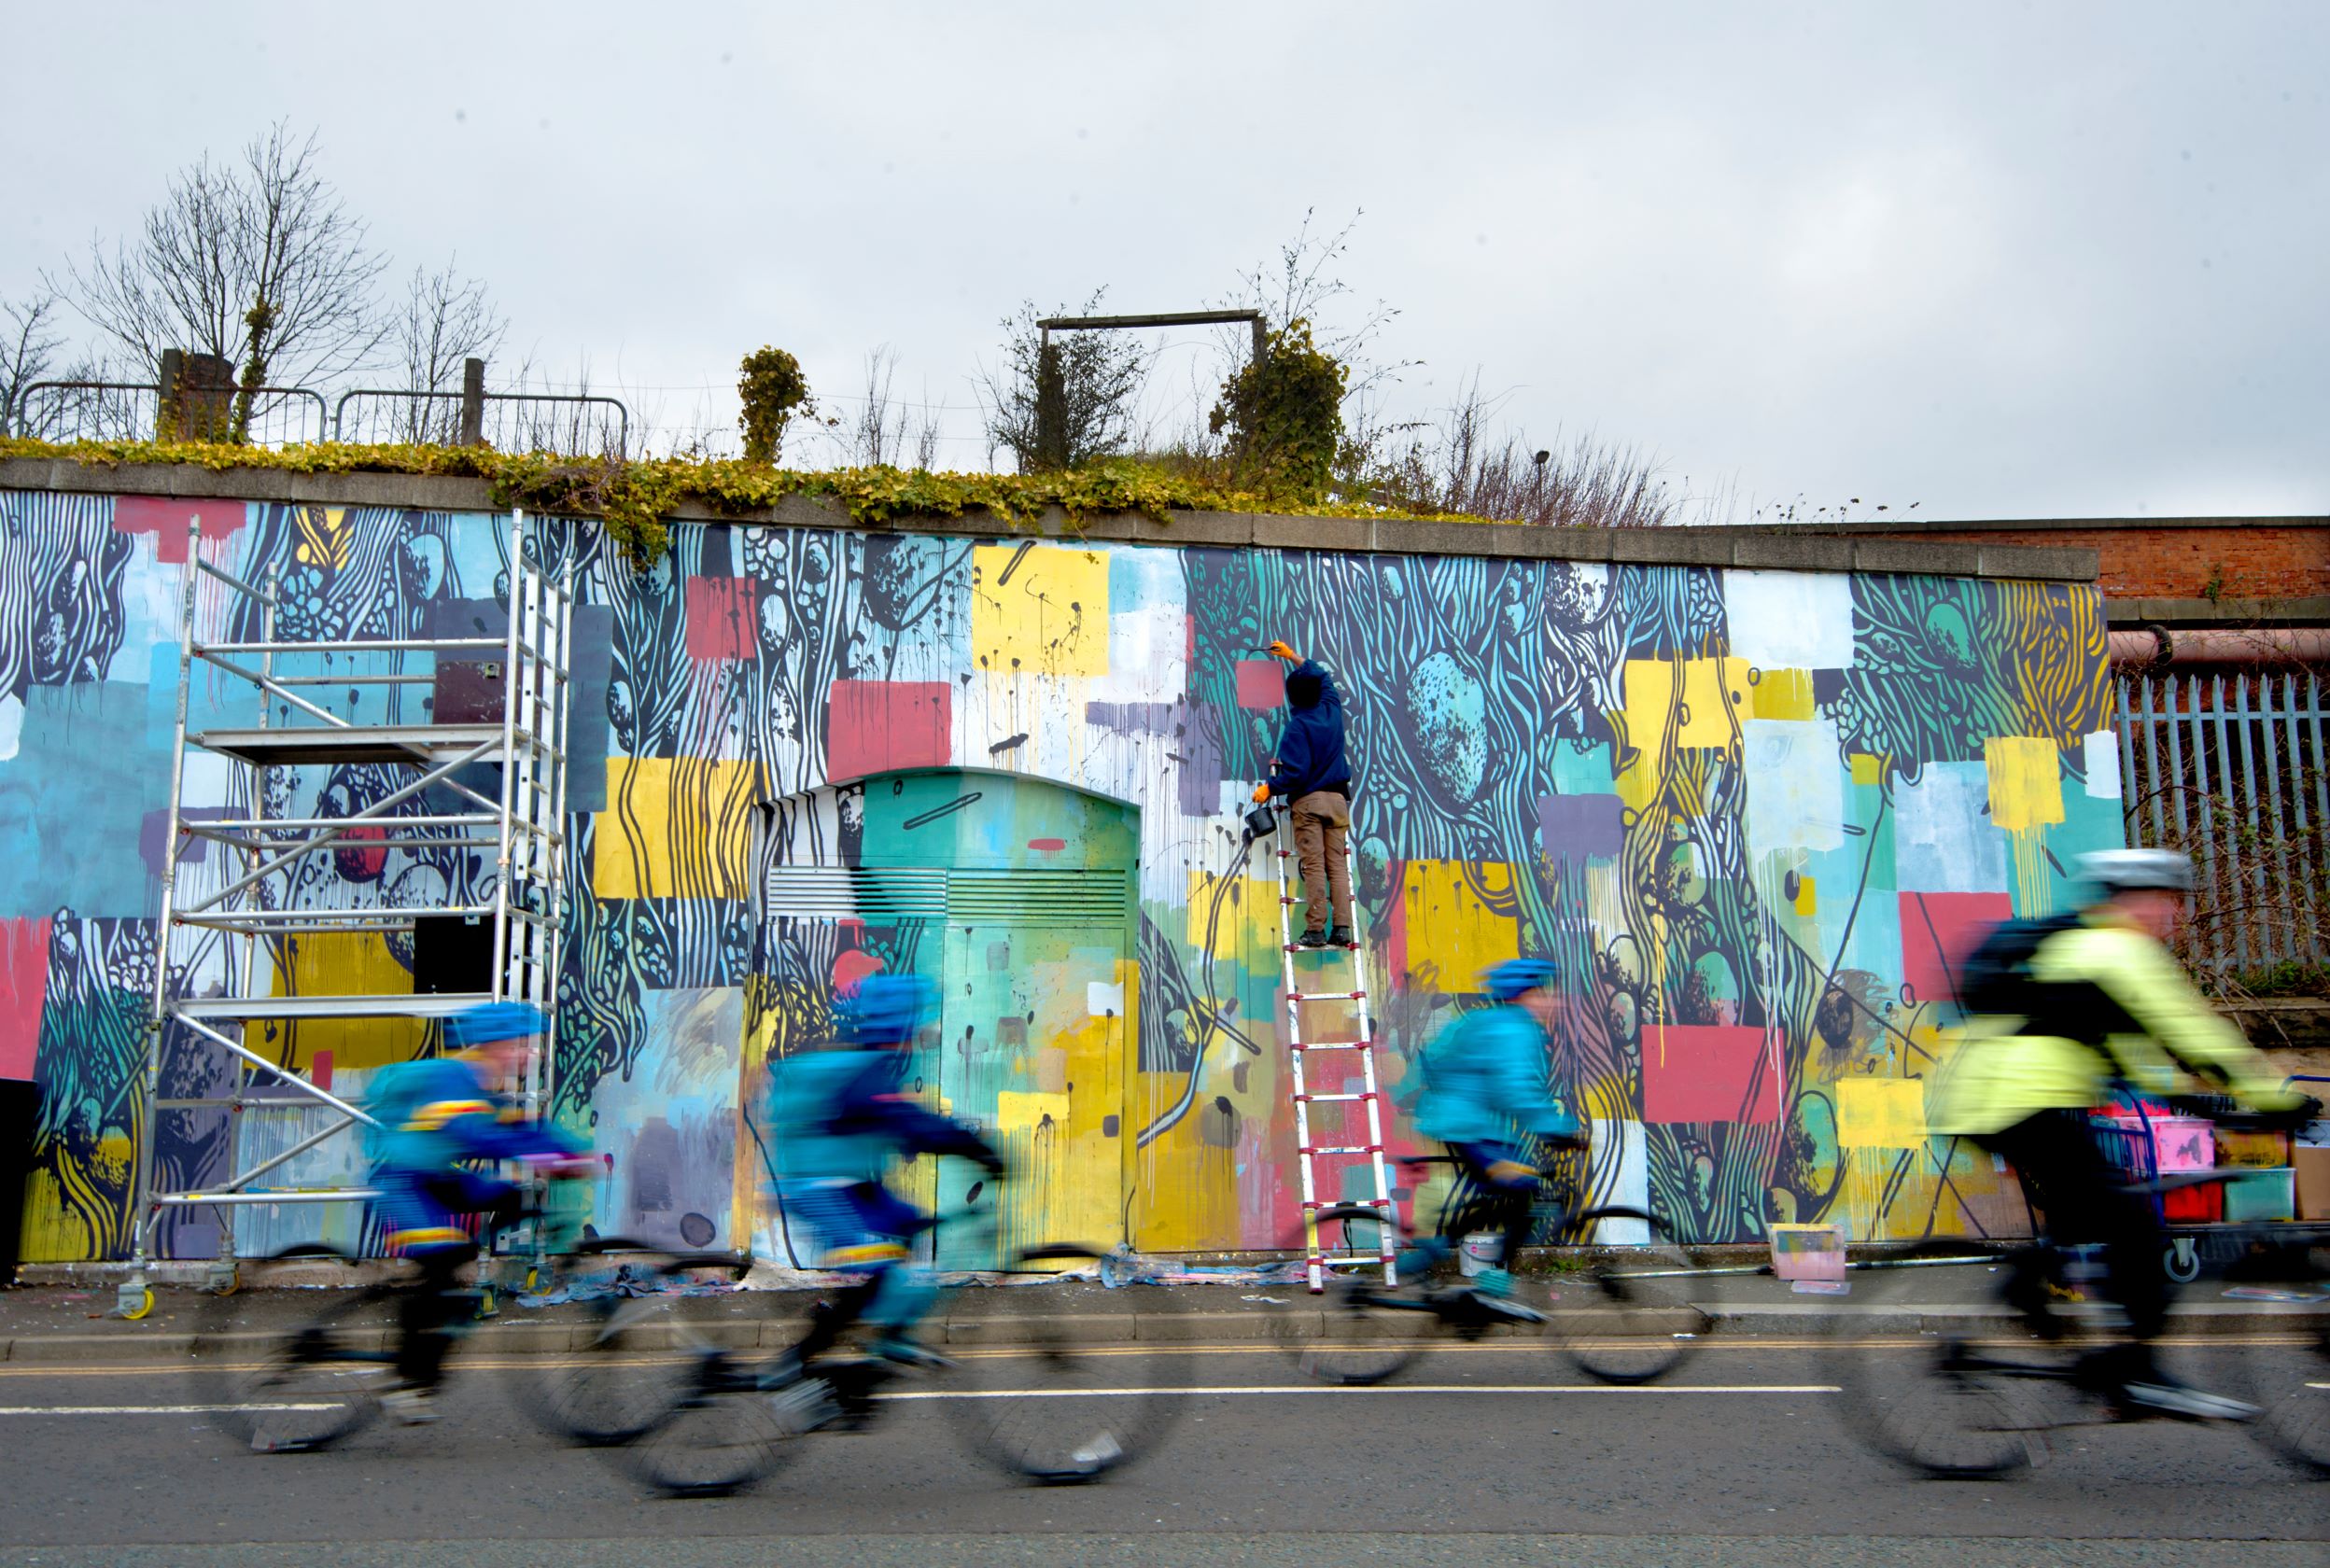 Cyclists ride past a rural mural